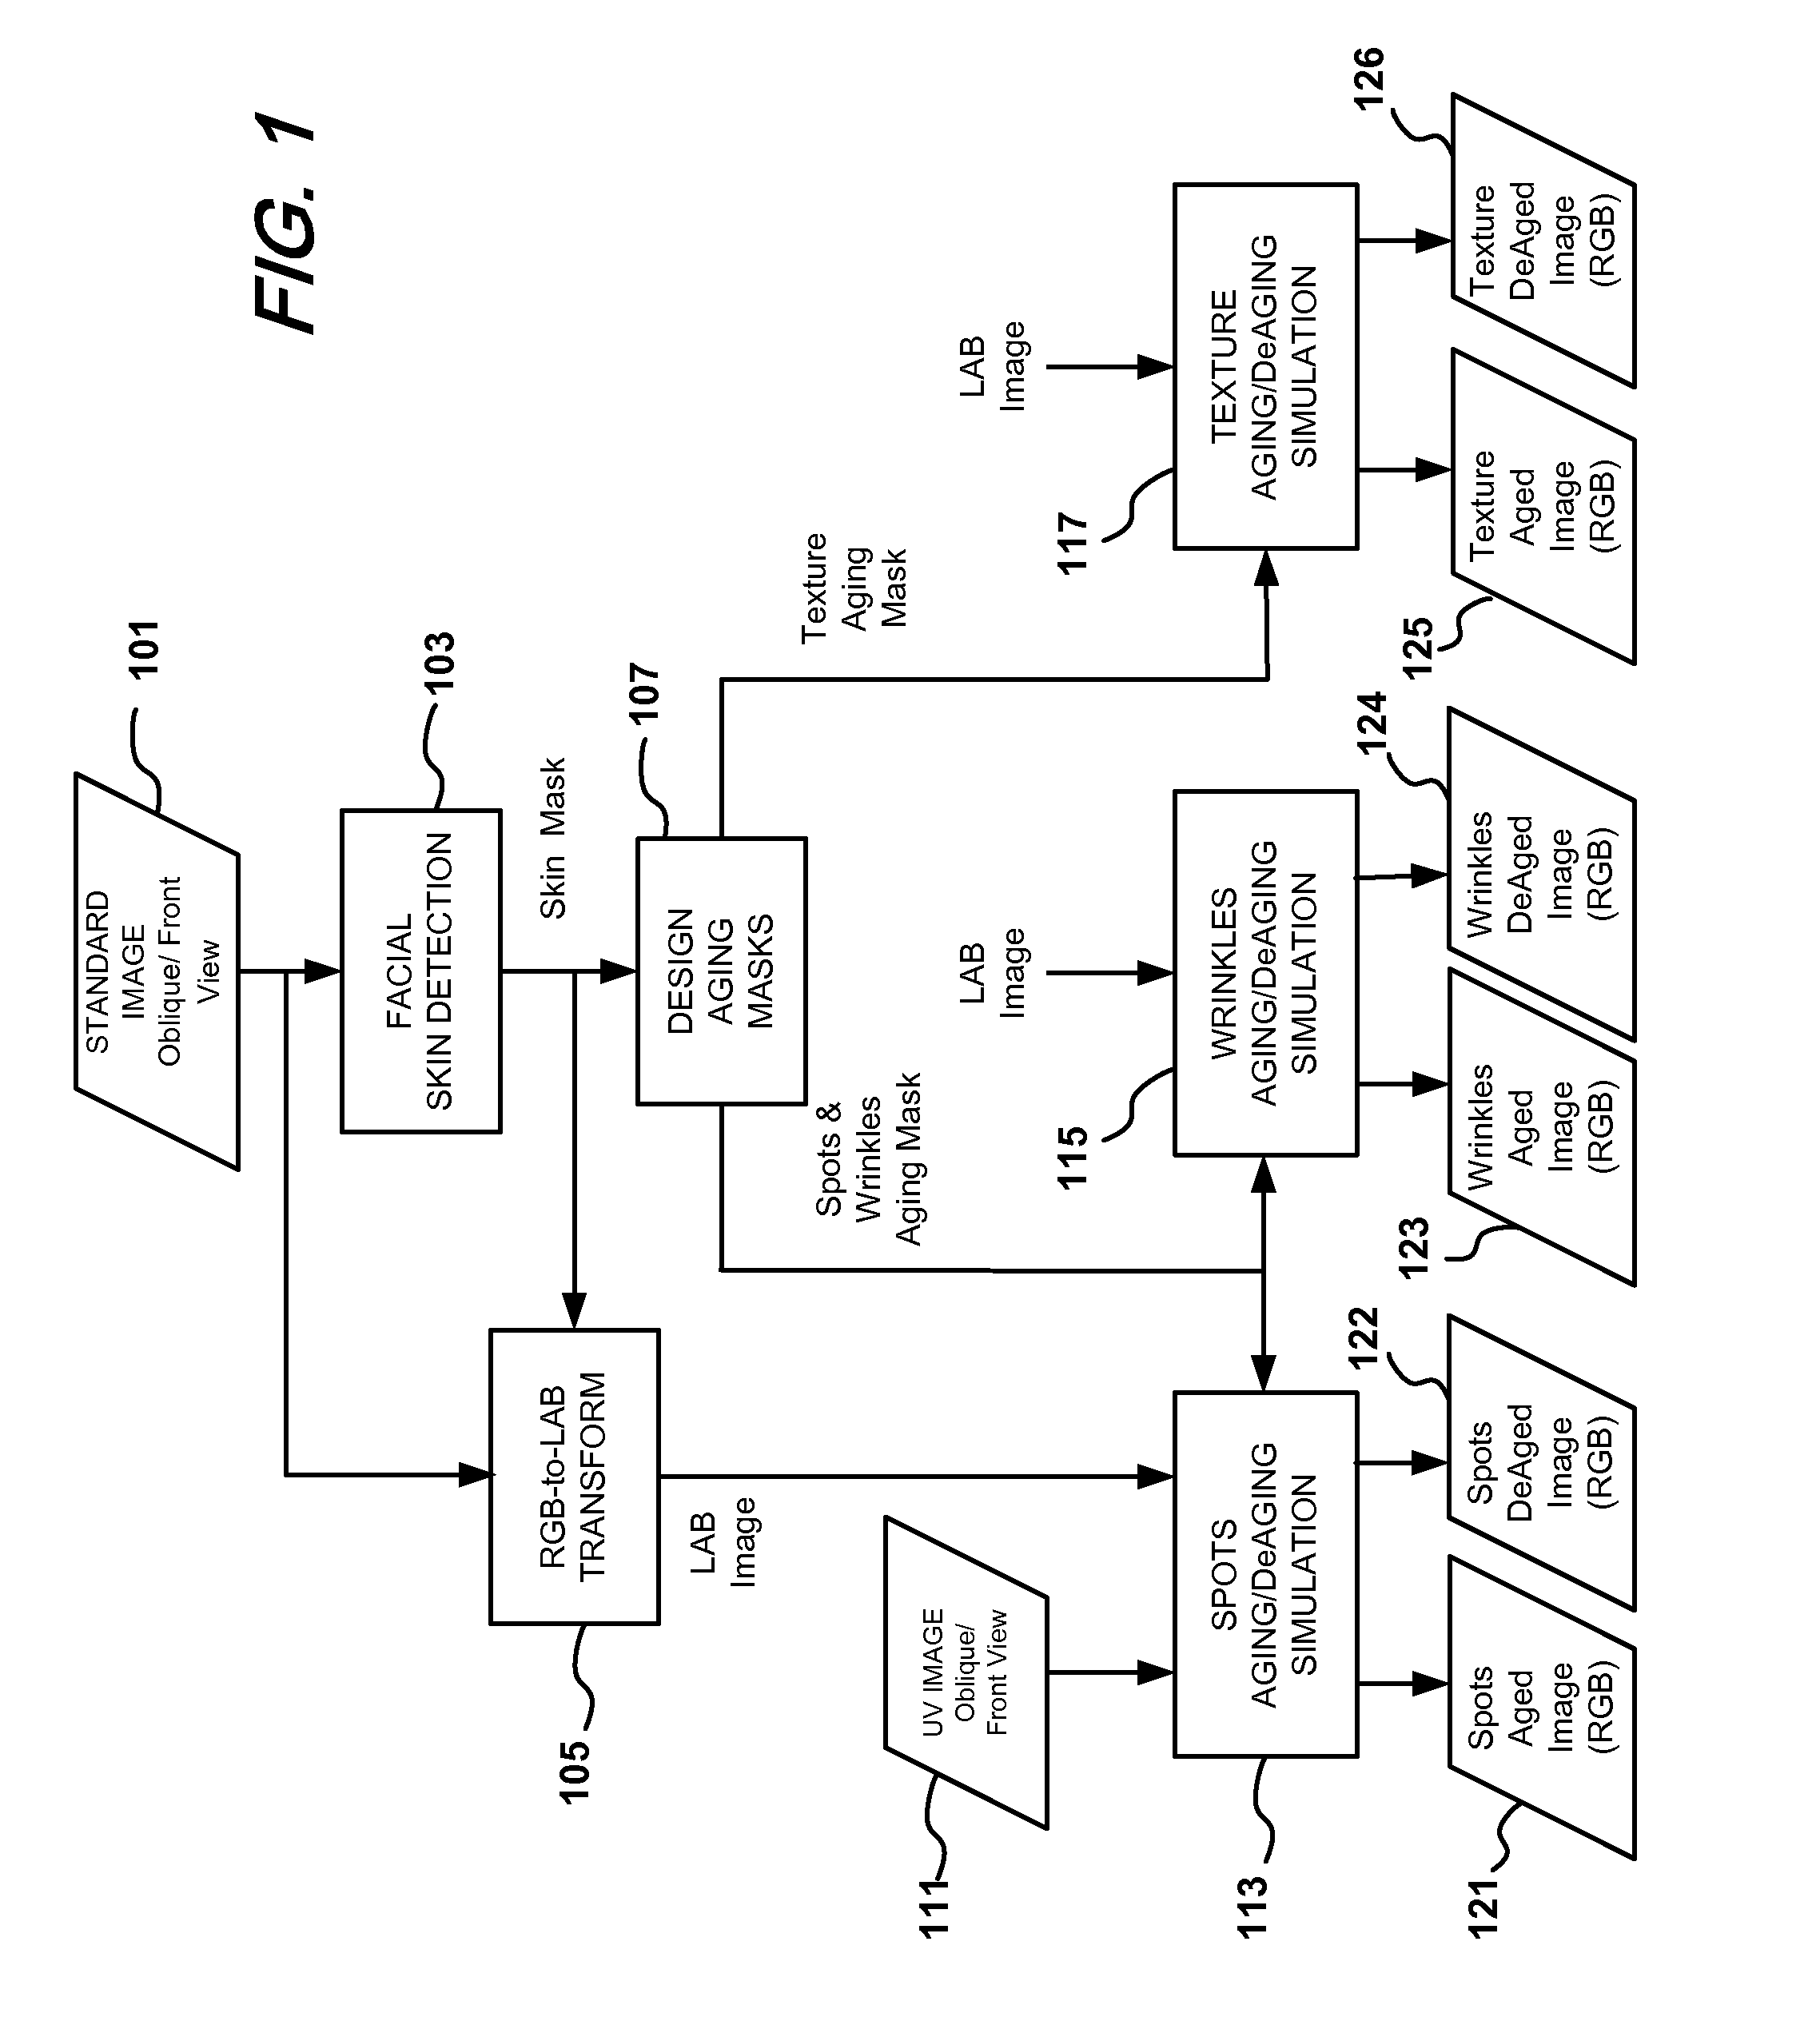 Method and apparatus for simulation of facial skin aging and de-aging